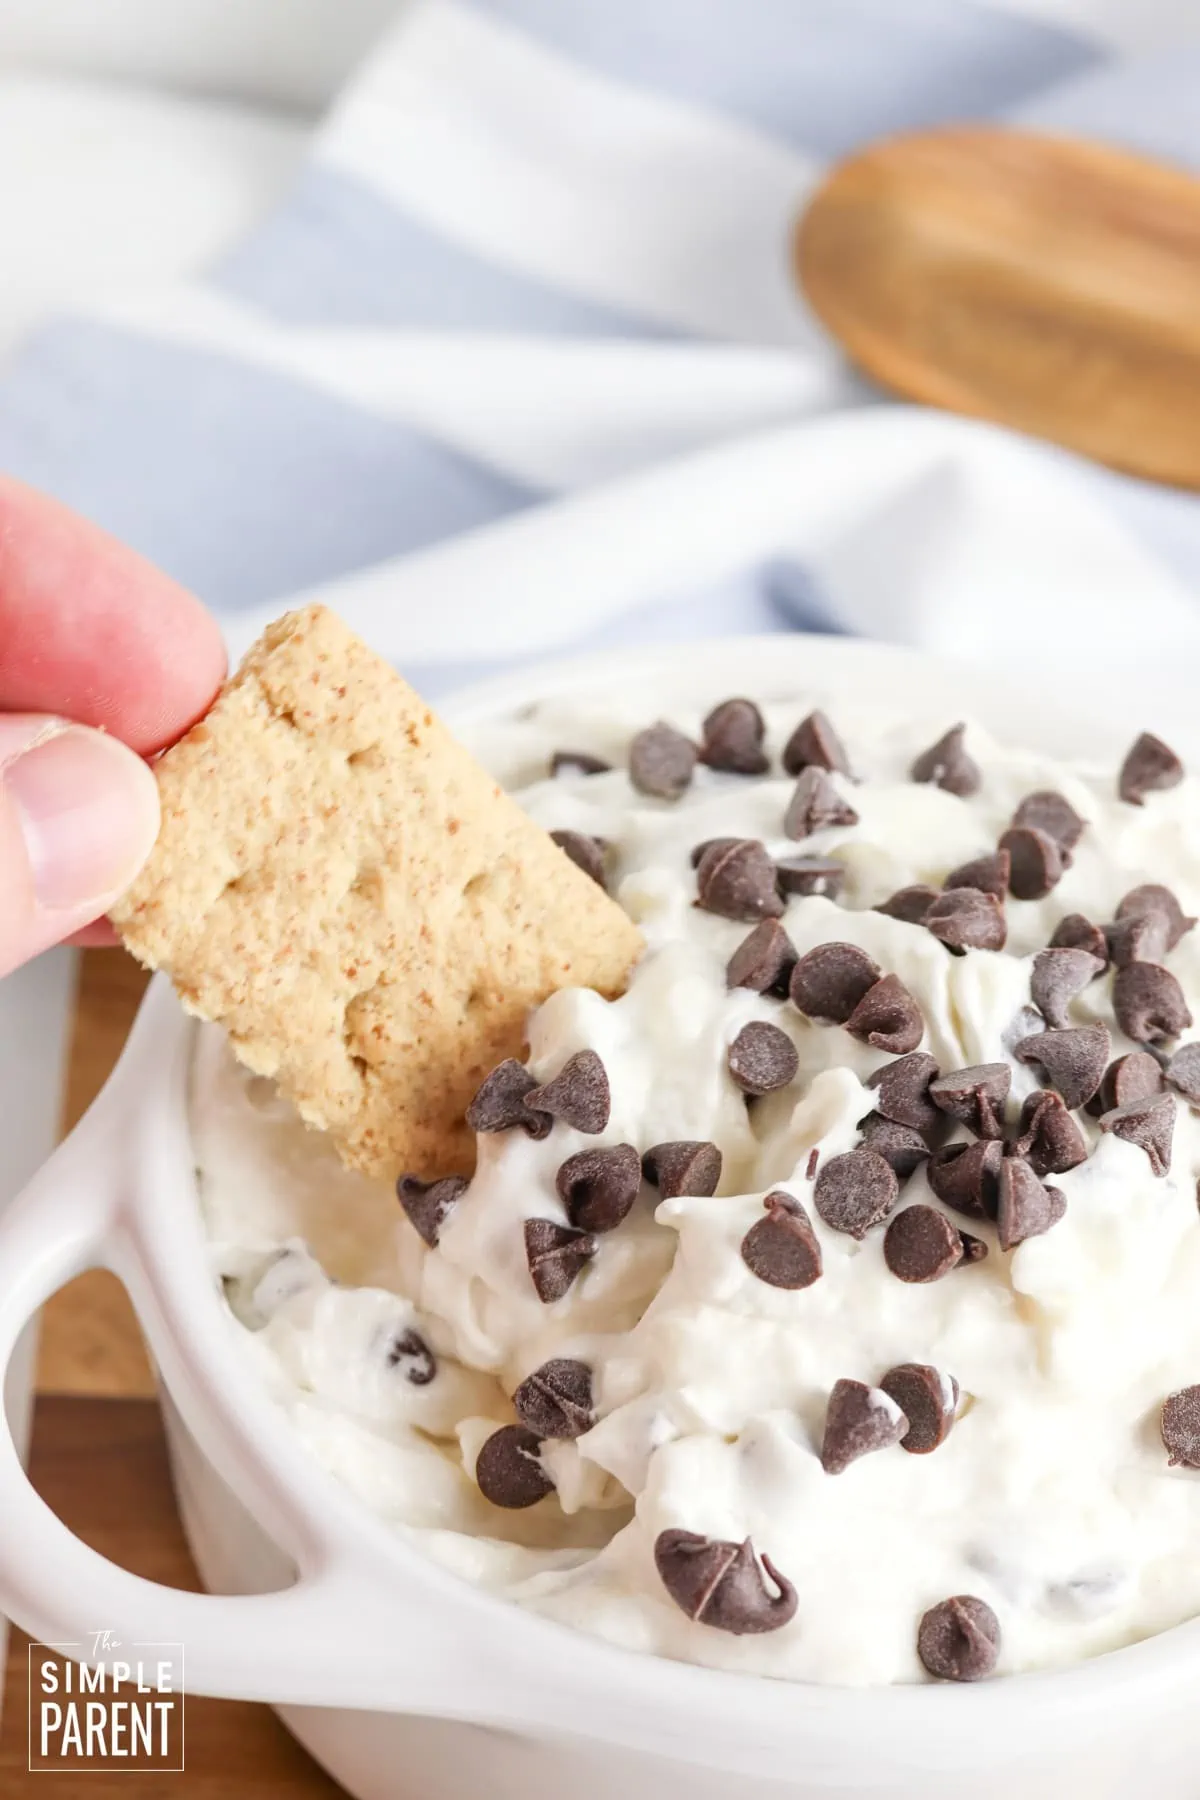 Graham cracker dipping in Booty Dip topped with mini chocolate chips